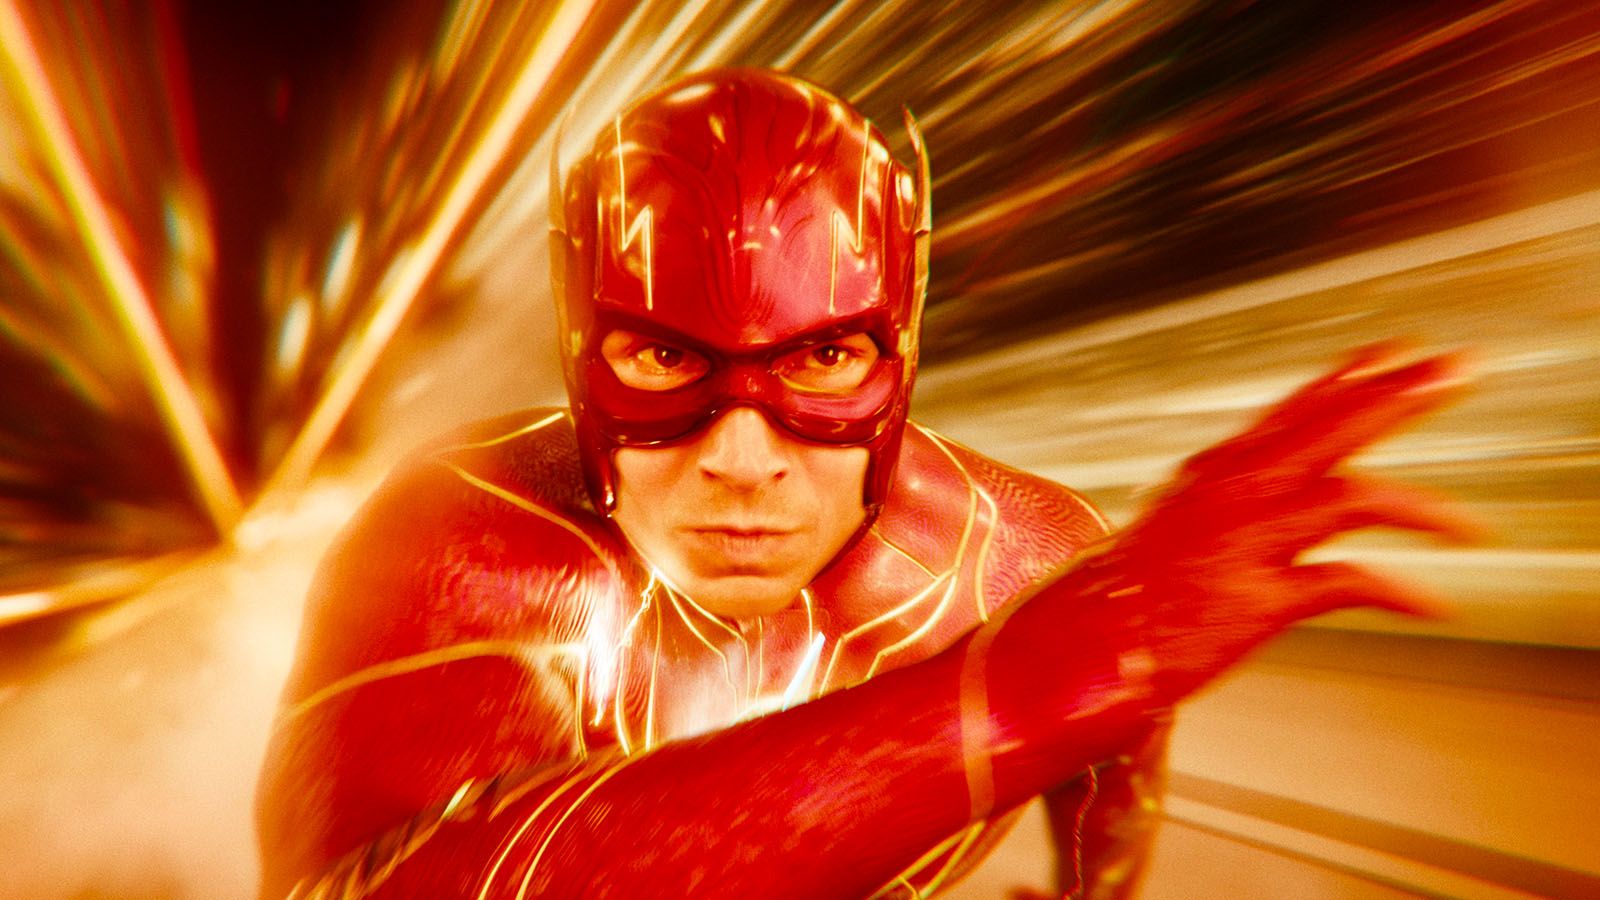 Ezra Miller returns to his role as Barry Allen/The Flash in Warner Bros. and DC Comics’ The Flash.